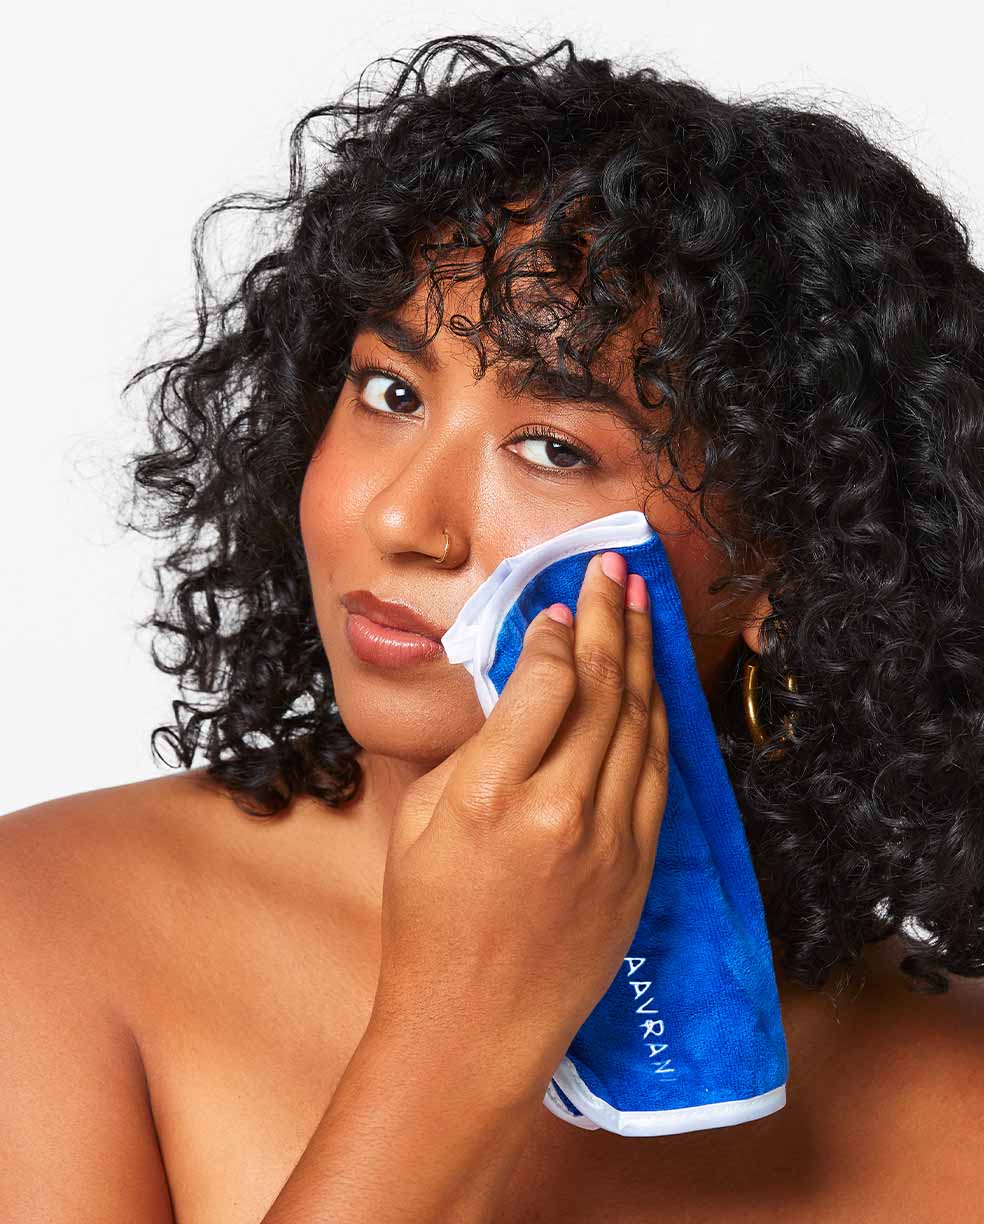 AAVRANI Face Towel Set being used by model